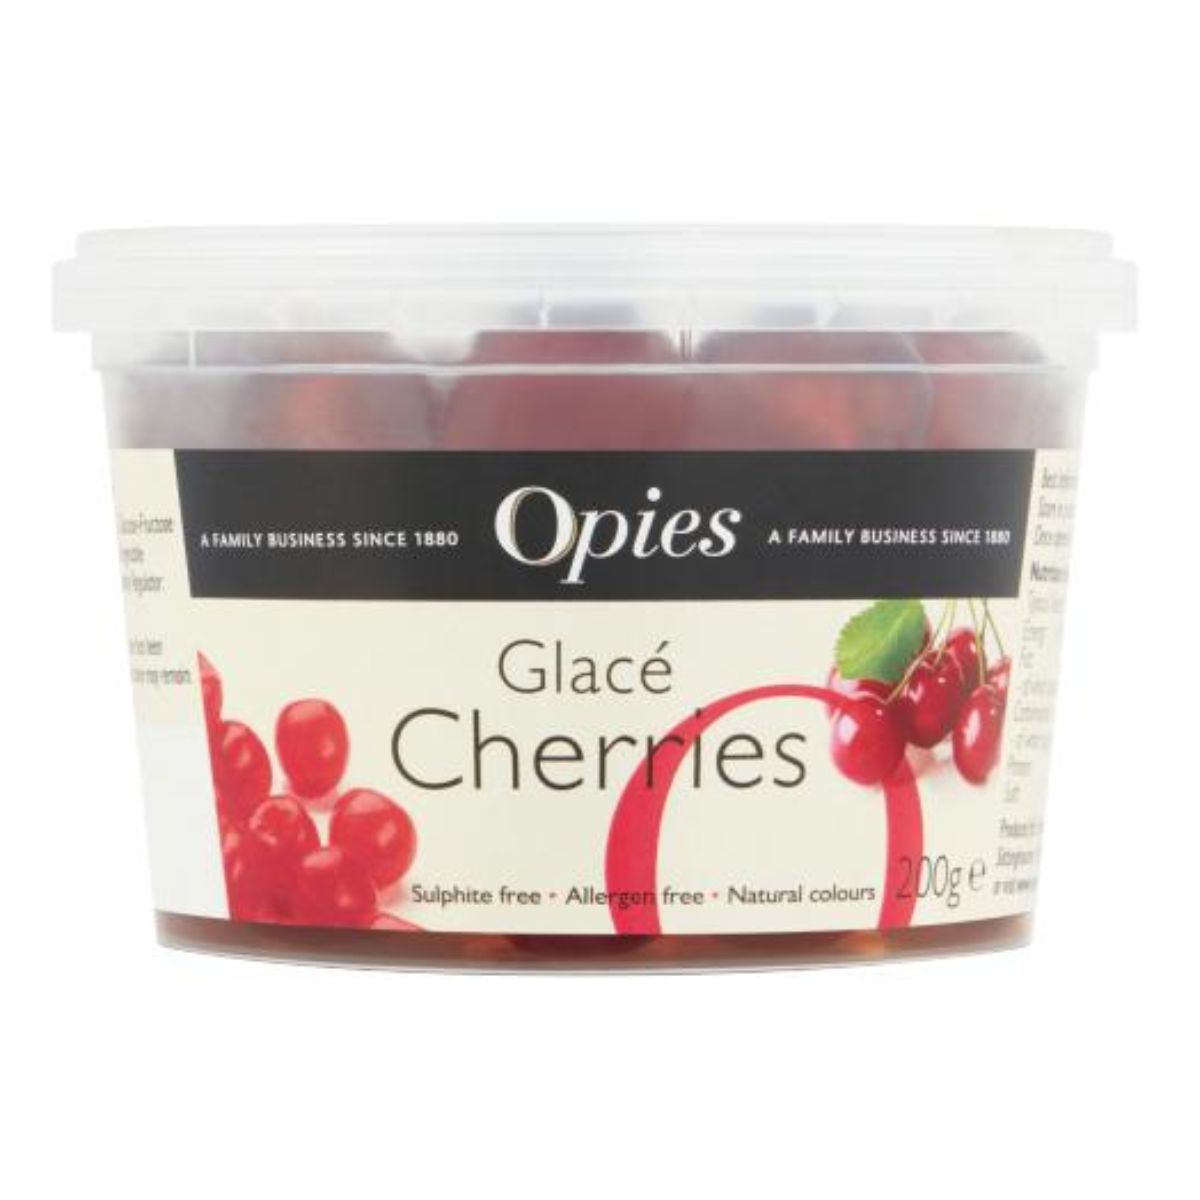 Opies - Glace Cherries - 200g in a plastic tub.